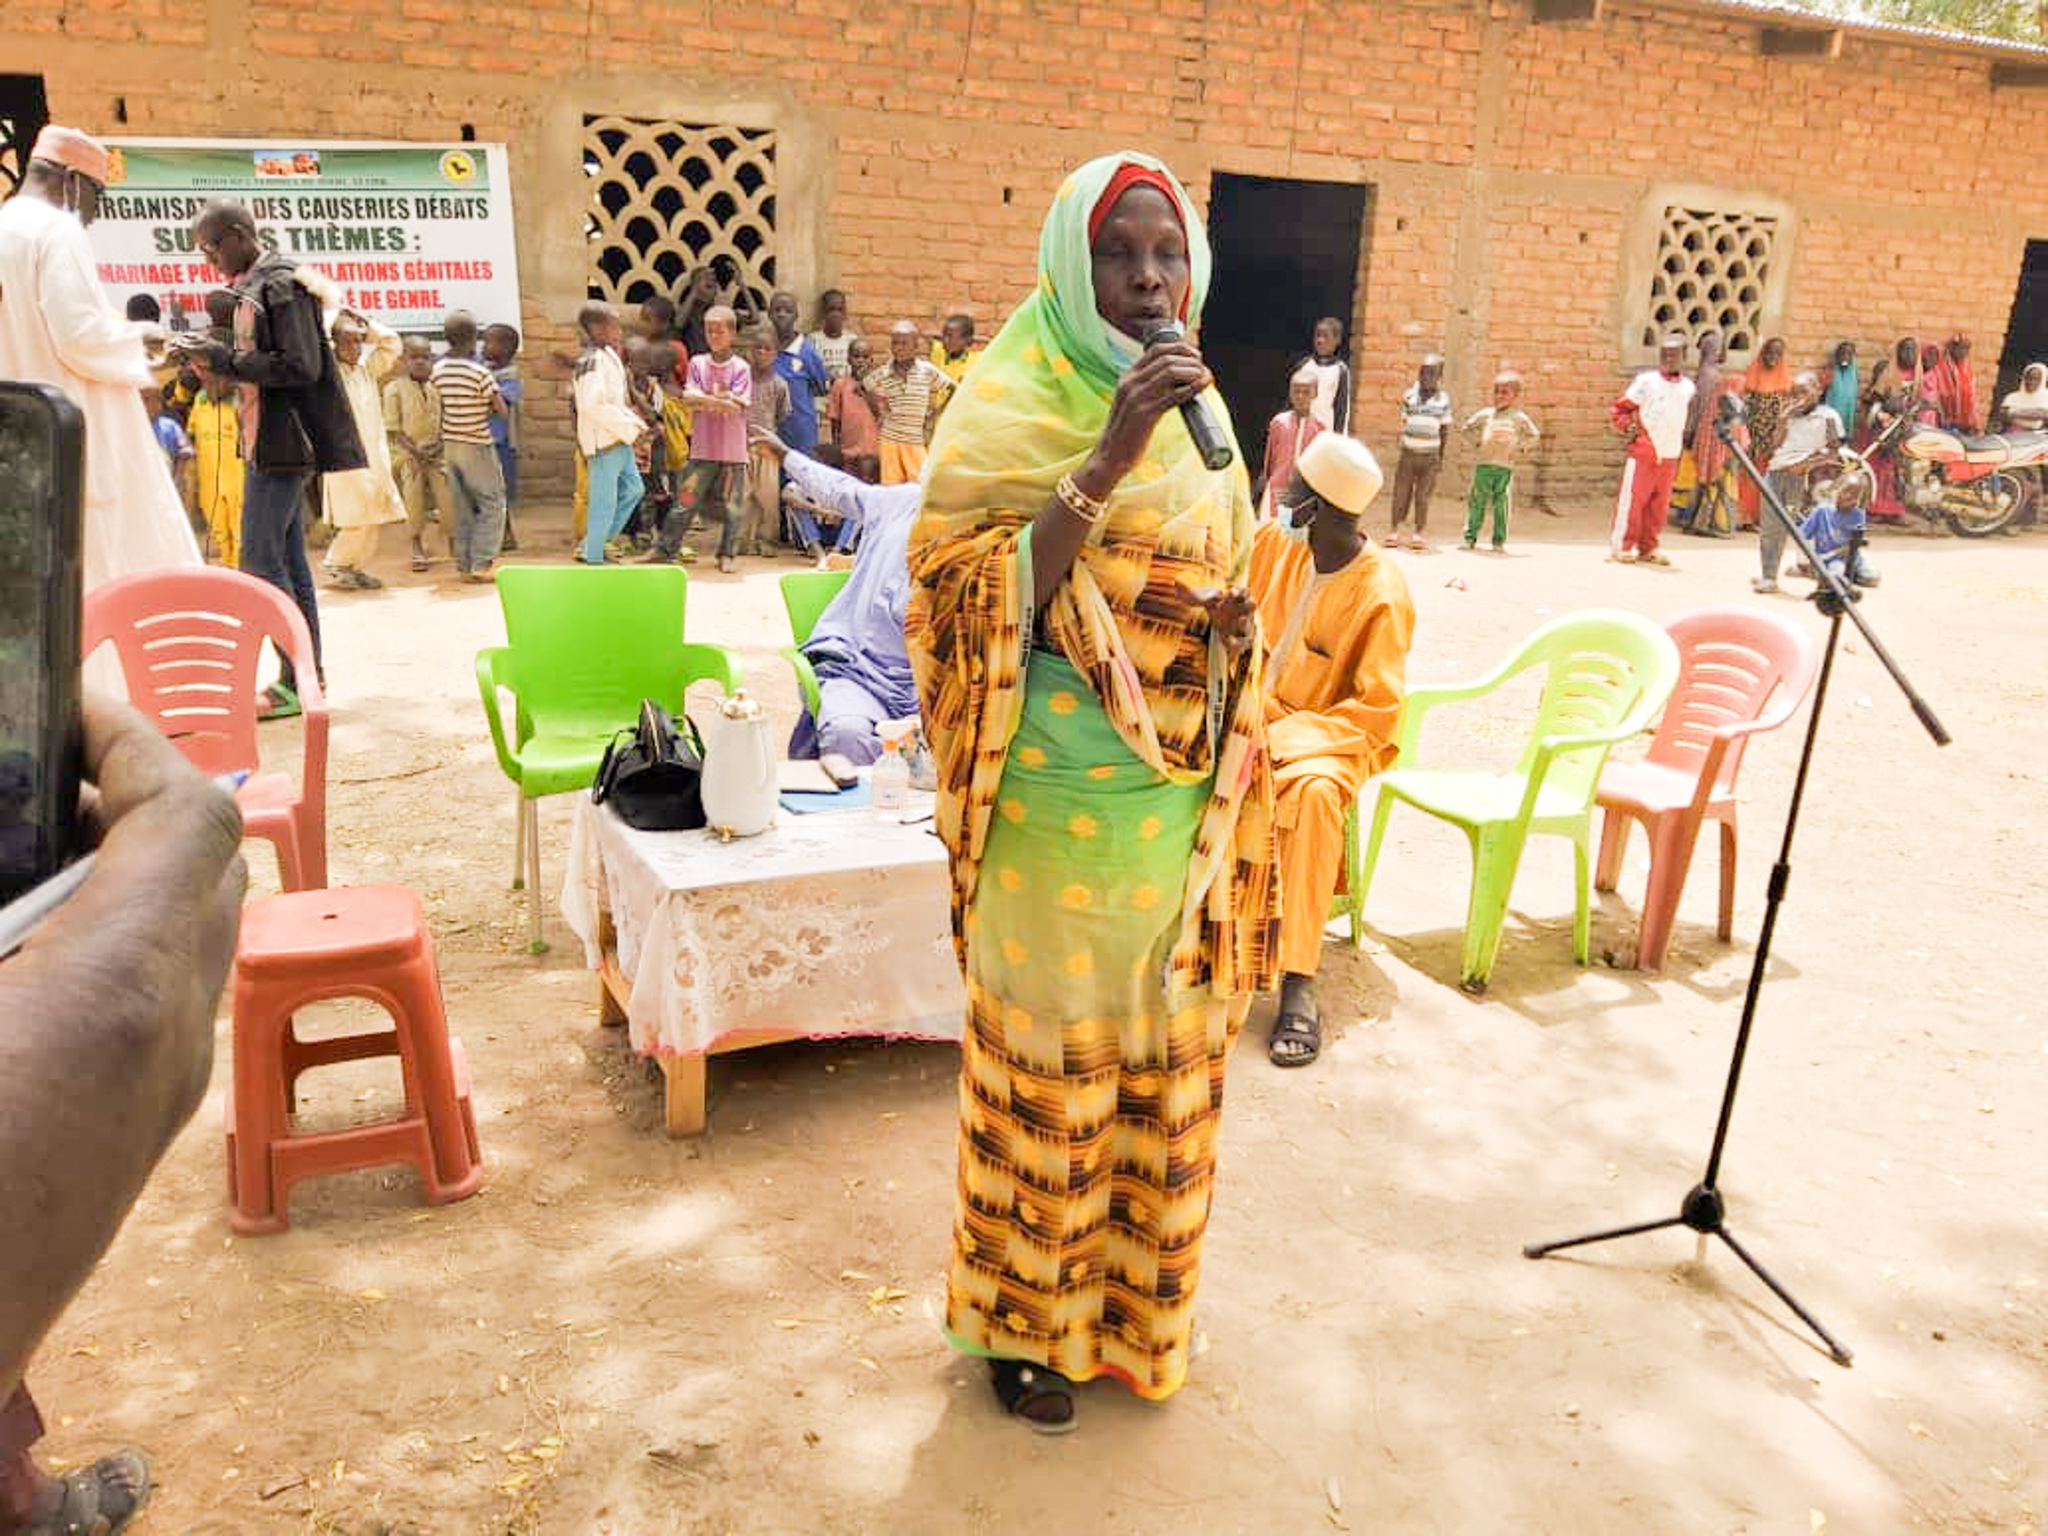 Baba Sultan Ibrahim, Chairperson, Women Association of Limani Sub prefecture in Guité, Chad